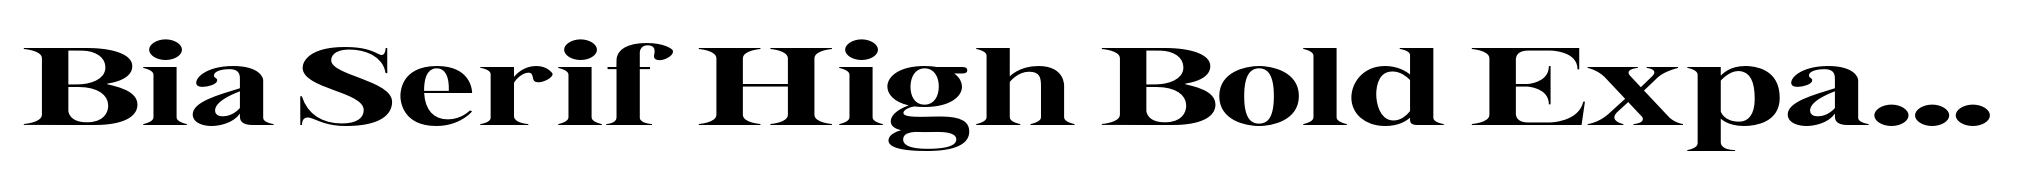 Bia Serif High Bold Expanded image